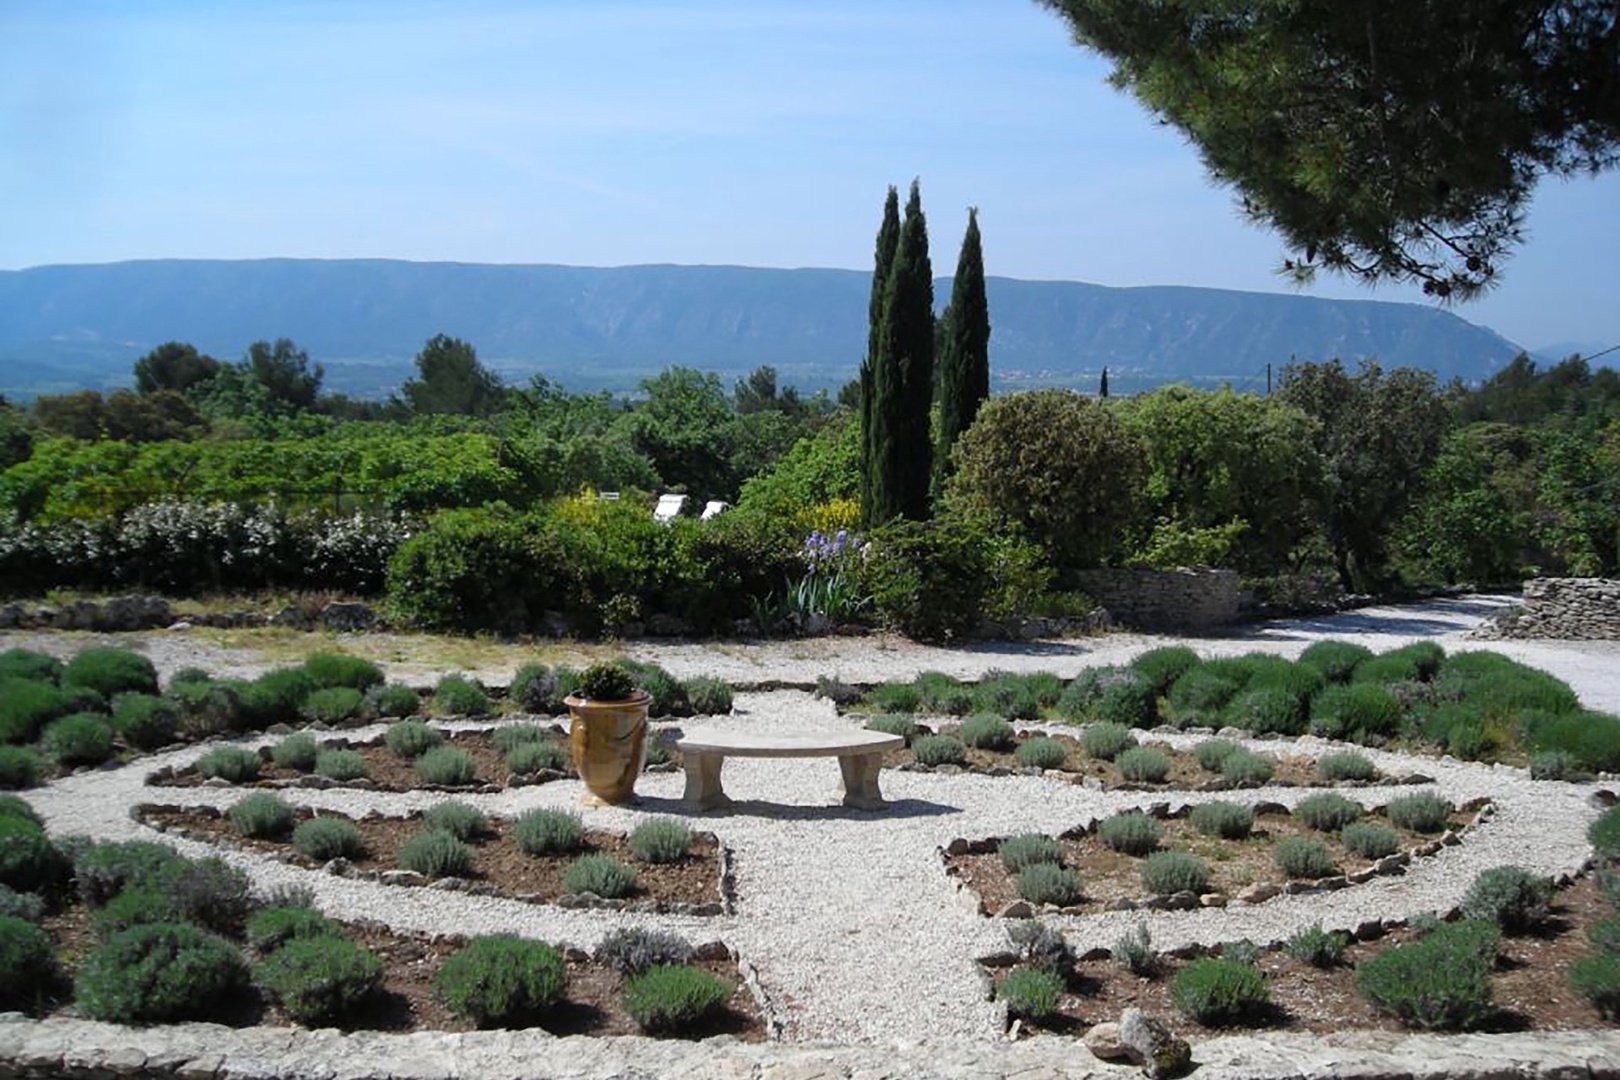 Enjoy lavender and the scents of Provence in the elegant gardens